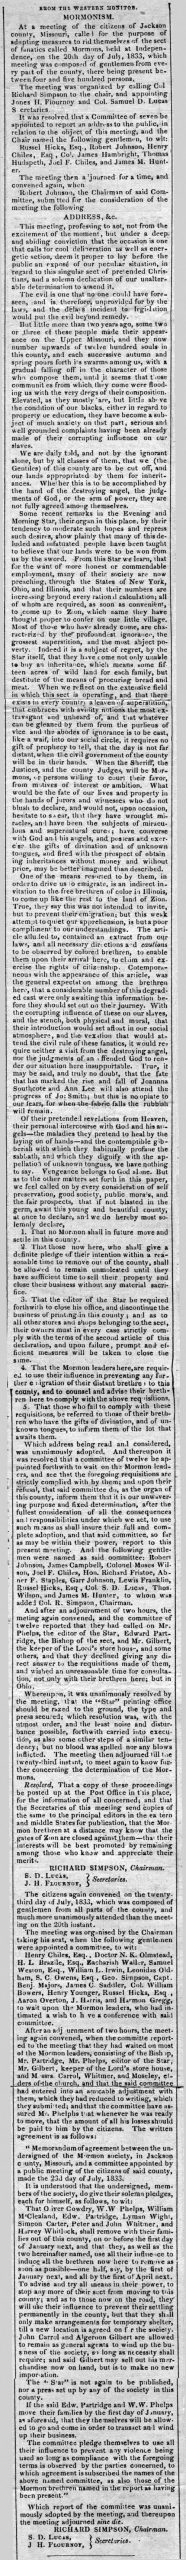 Western Monitor, August 2, 1833